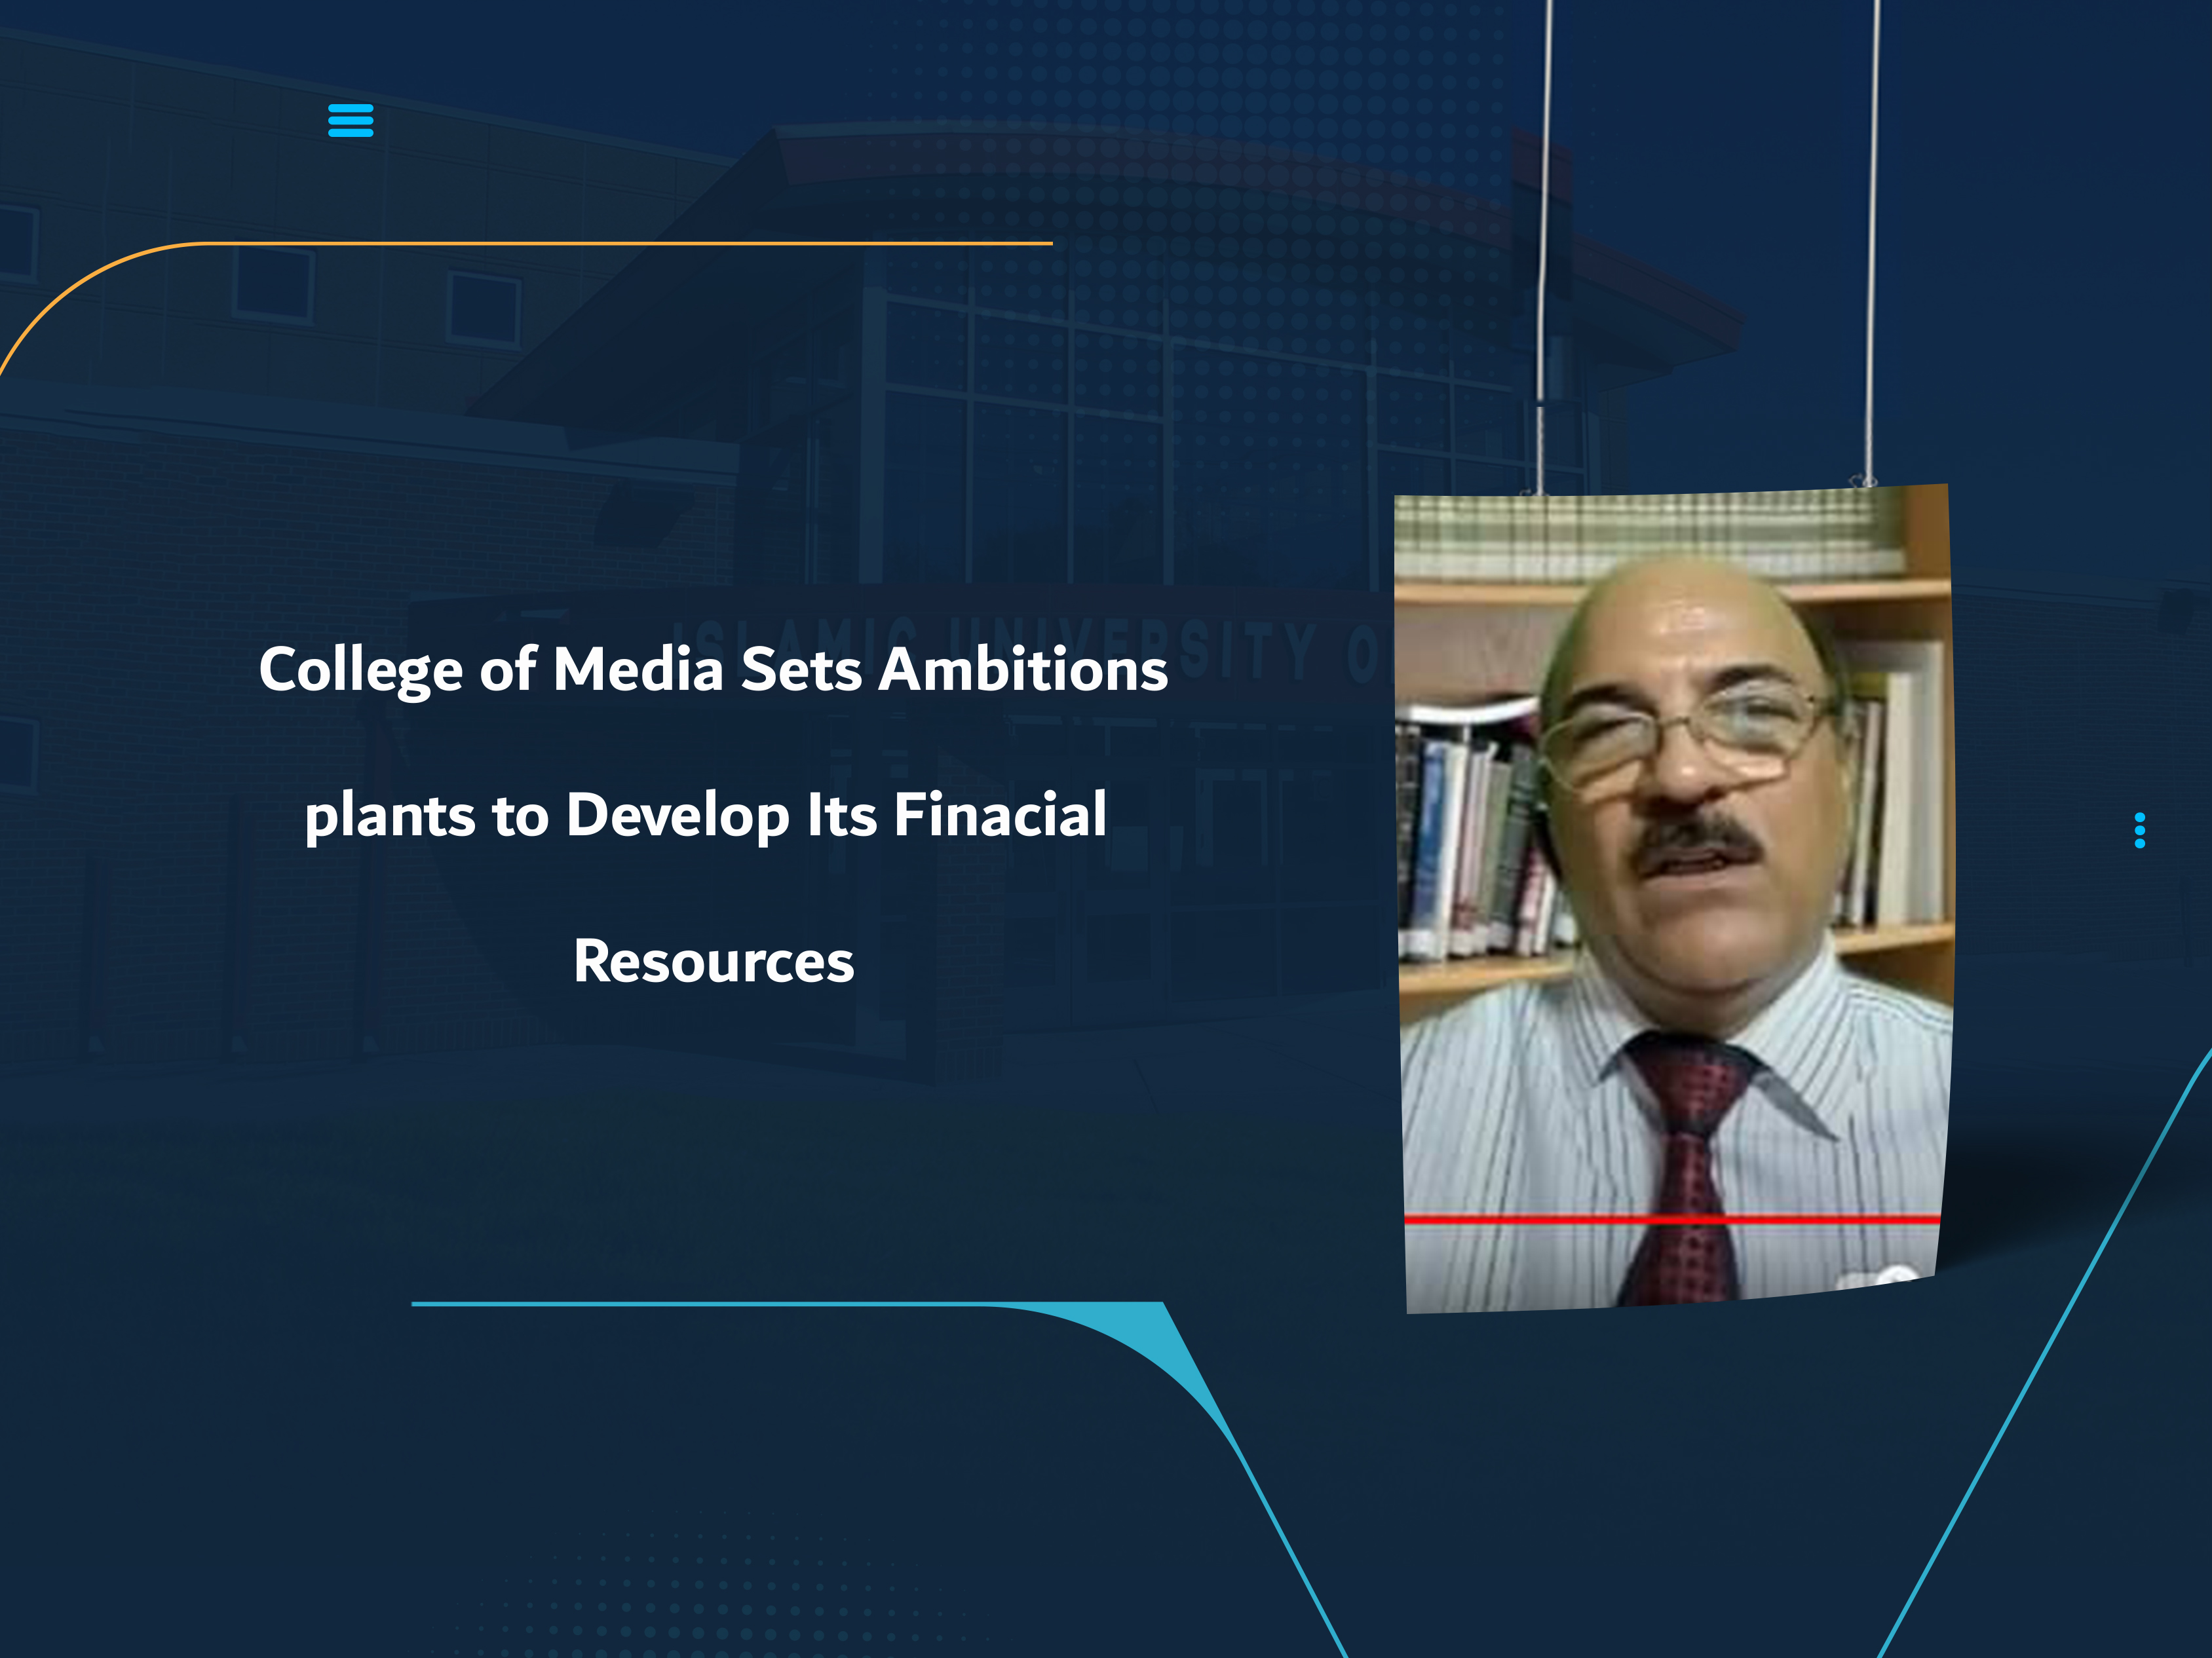 College of Media Sets Ambitious Plans to Develop Its Financial Resources